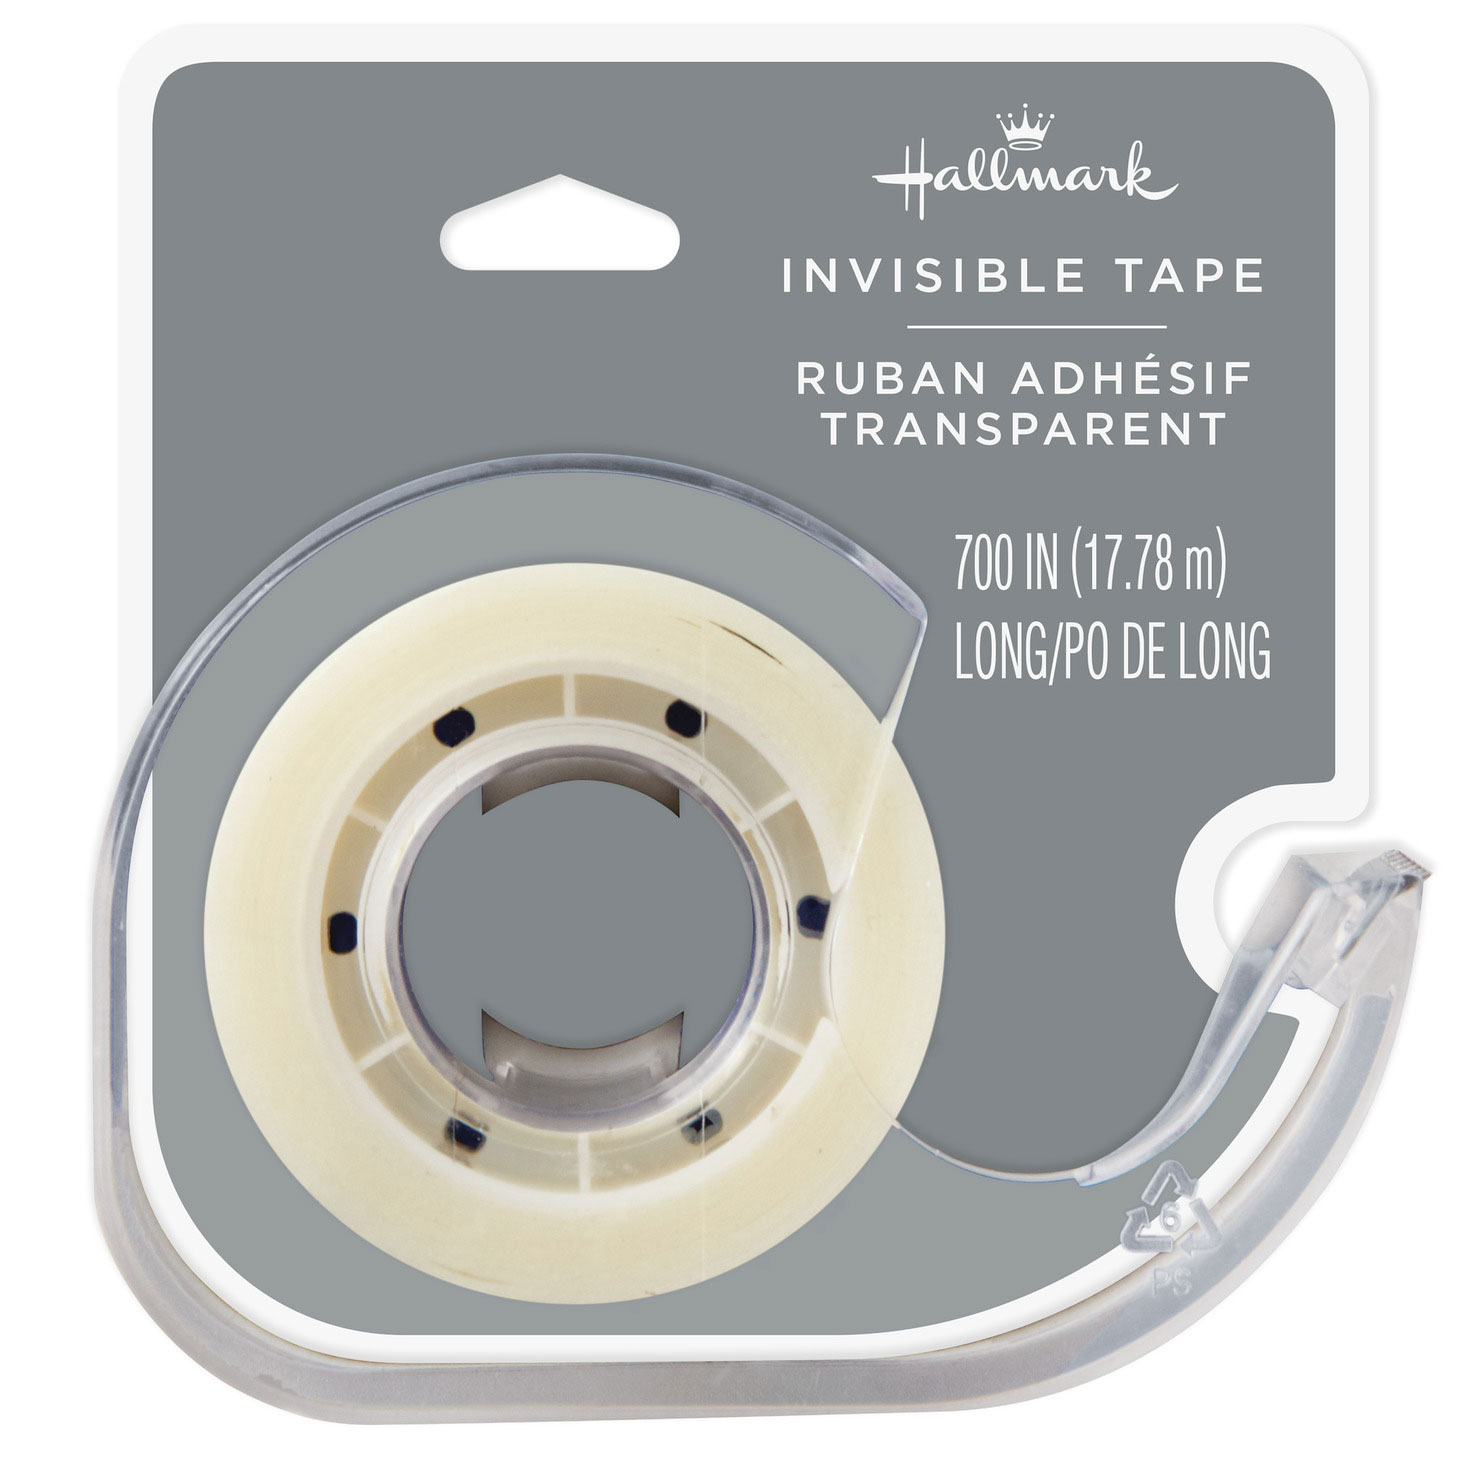 Invisible Tape, 3/4 for only USD 2.39 | Hallmark